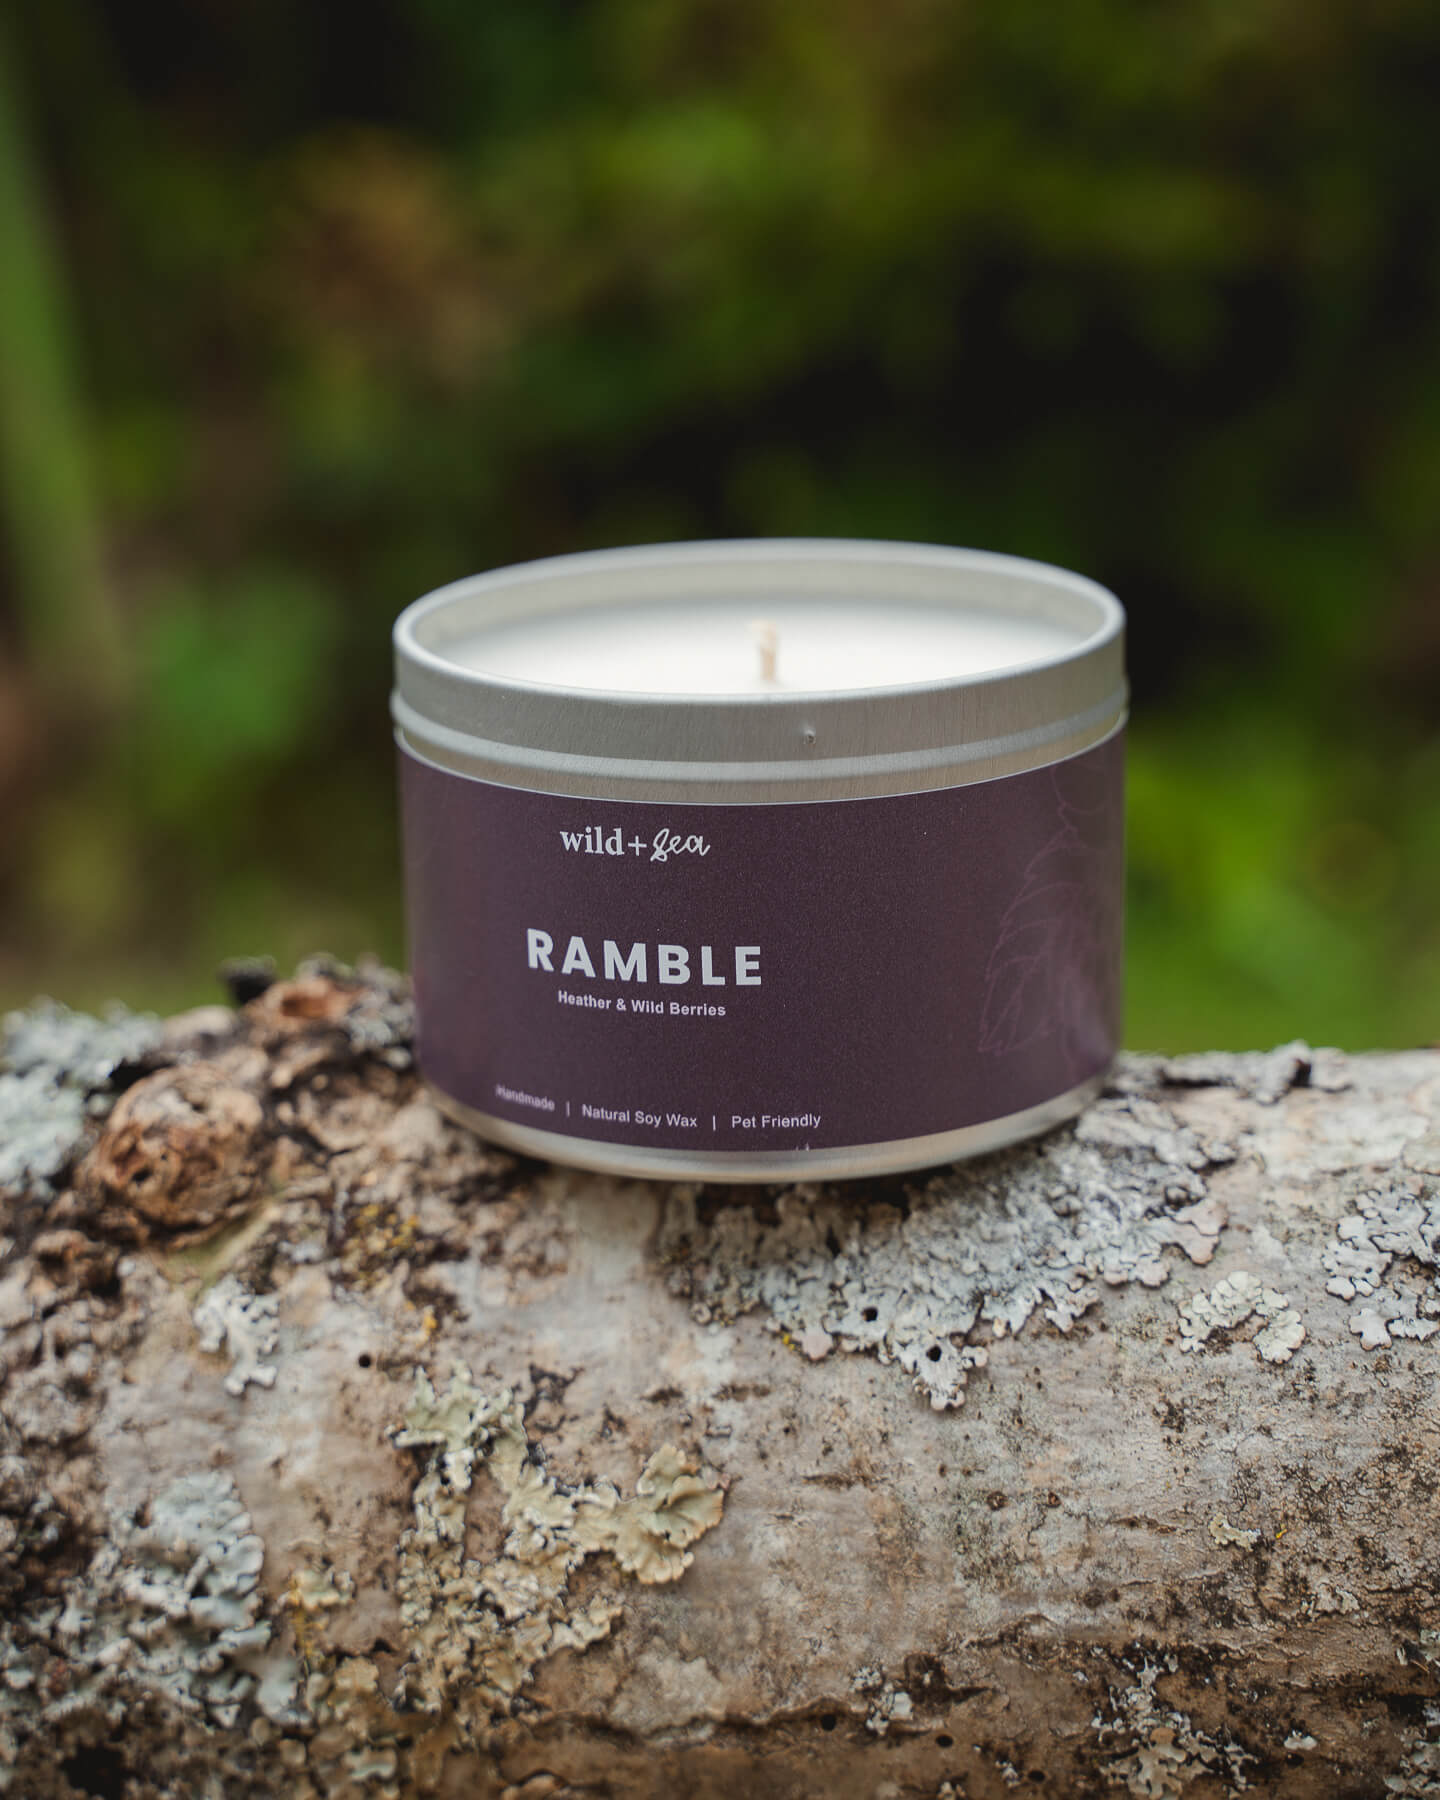 RAMBLE | Heather & Wild Berries | Soy Wax Pet Friendly Candle